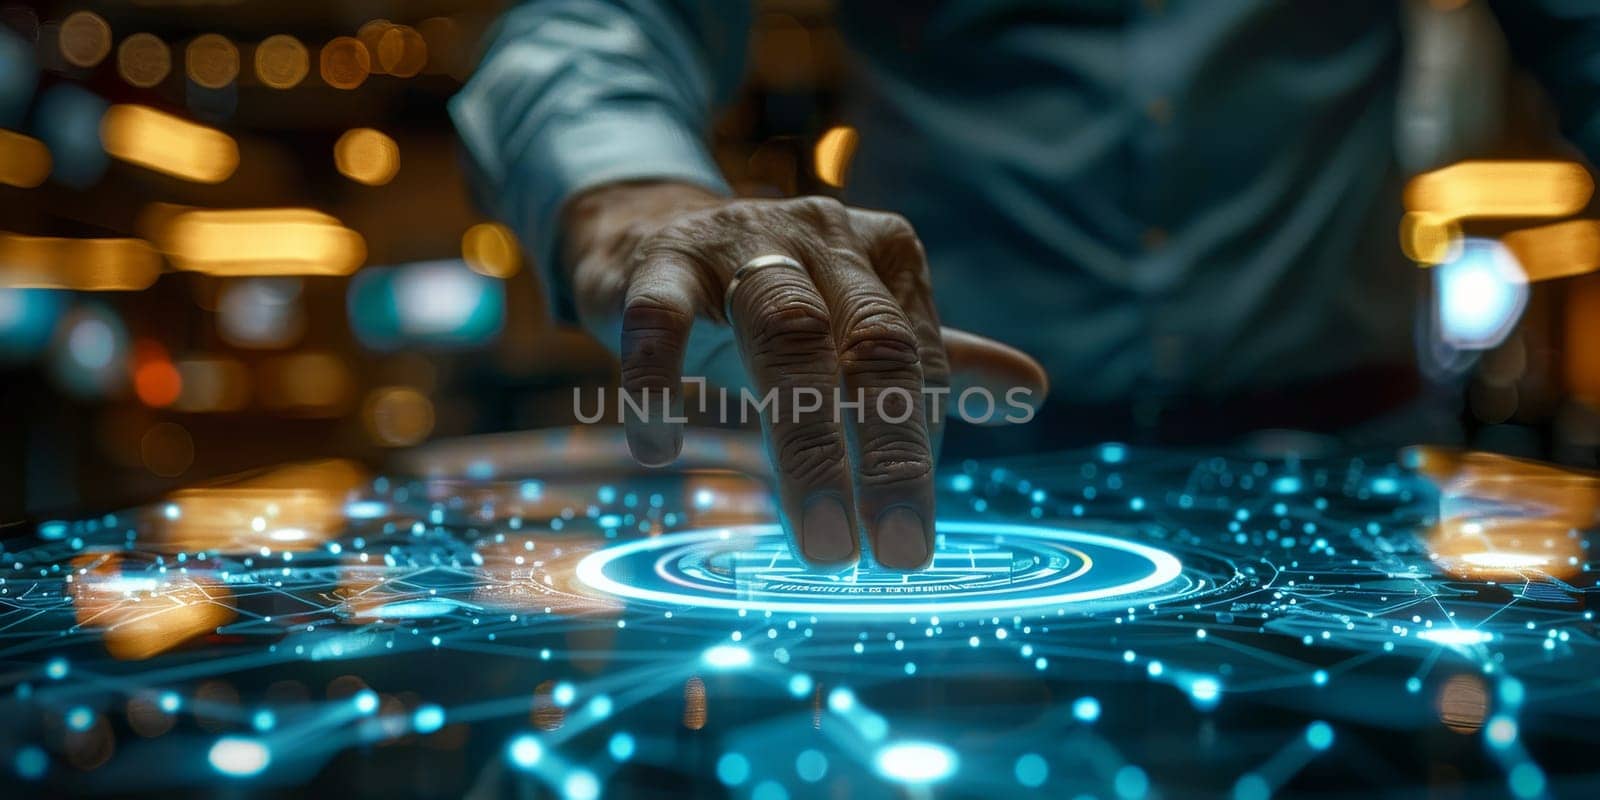 A person is touching a glowing circle on a computer screen. Concept of wonder and curiosity, as the person is exploring the digital world. The glowing circle could represent a new idea, a new concept